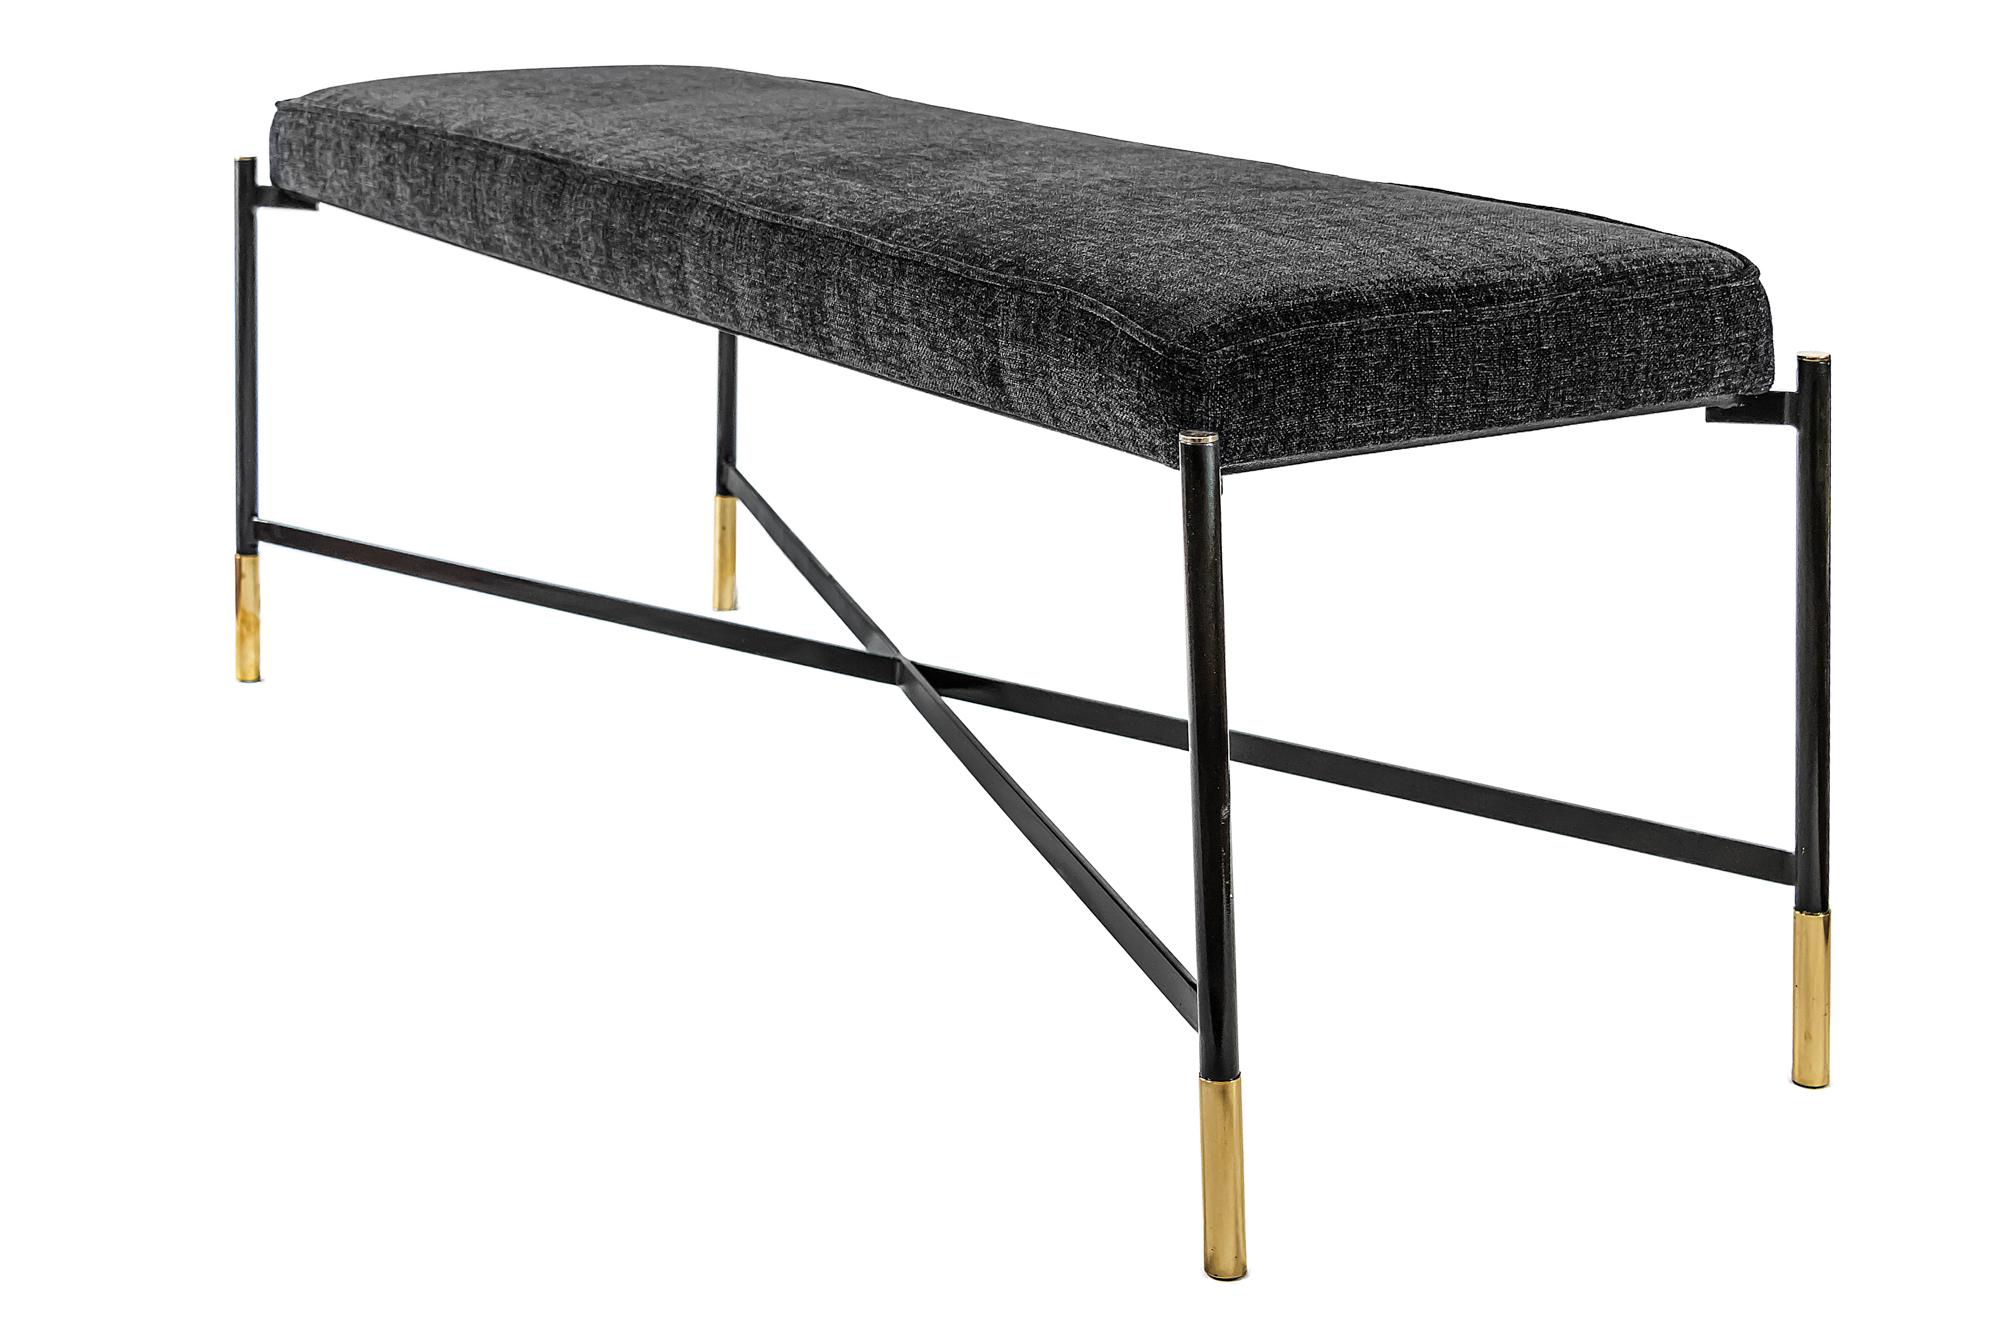 Contemporary Italian bench is made of metal legs decorated with brass details. The seat part is upholstered with black velour textile.